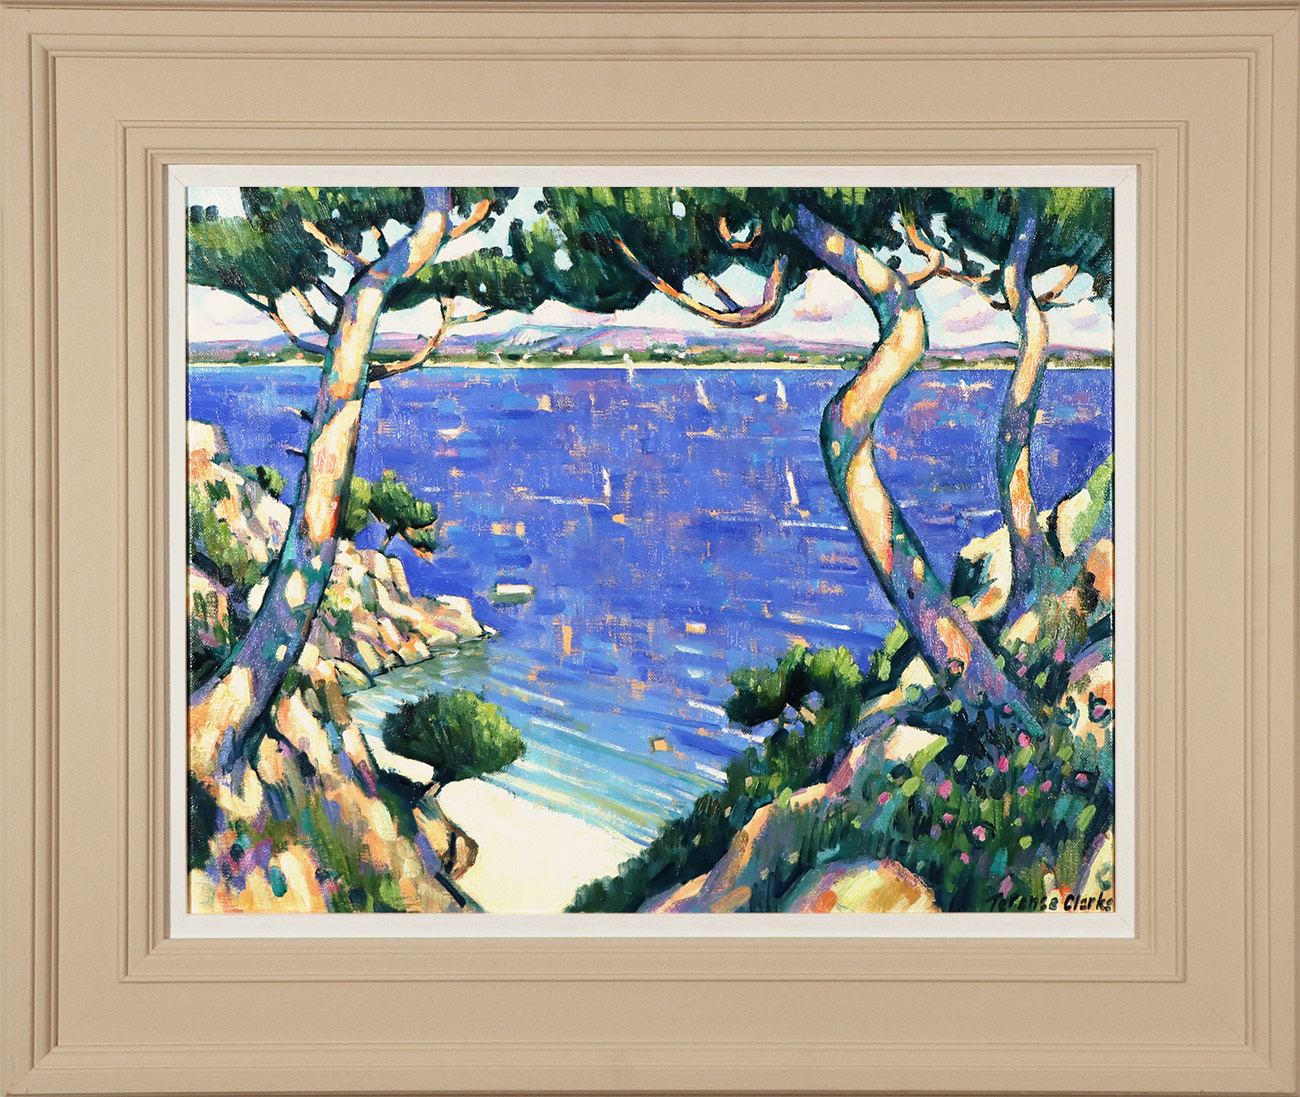 Terence Clarke, Original oil painting on canvas, Little Bay near La Ciotat Click to enlarge